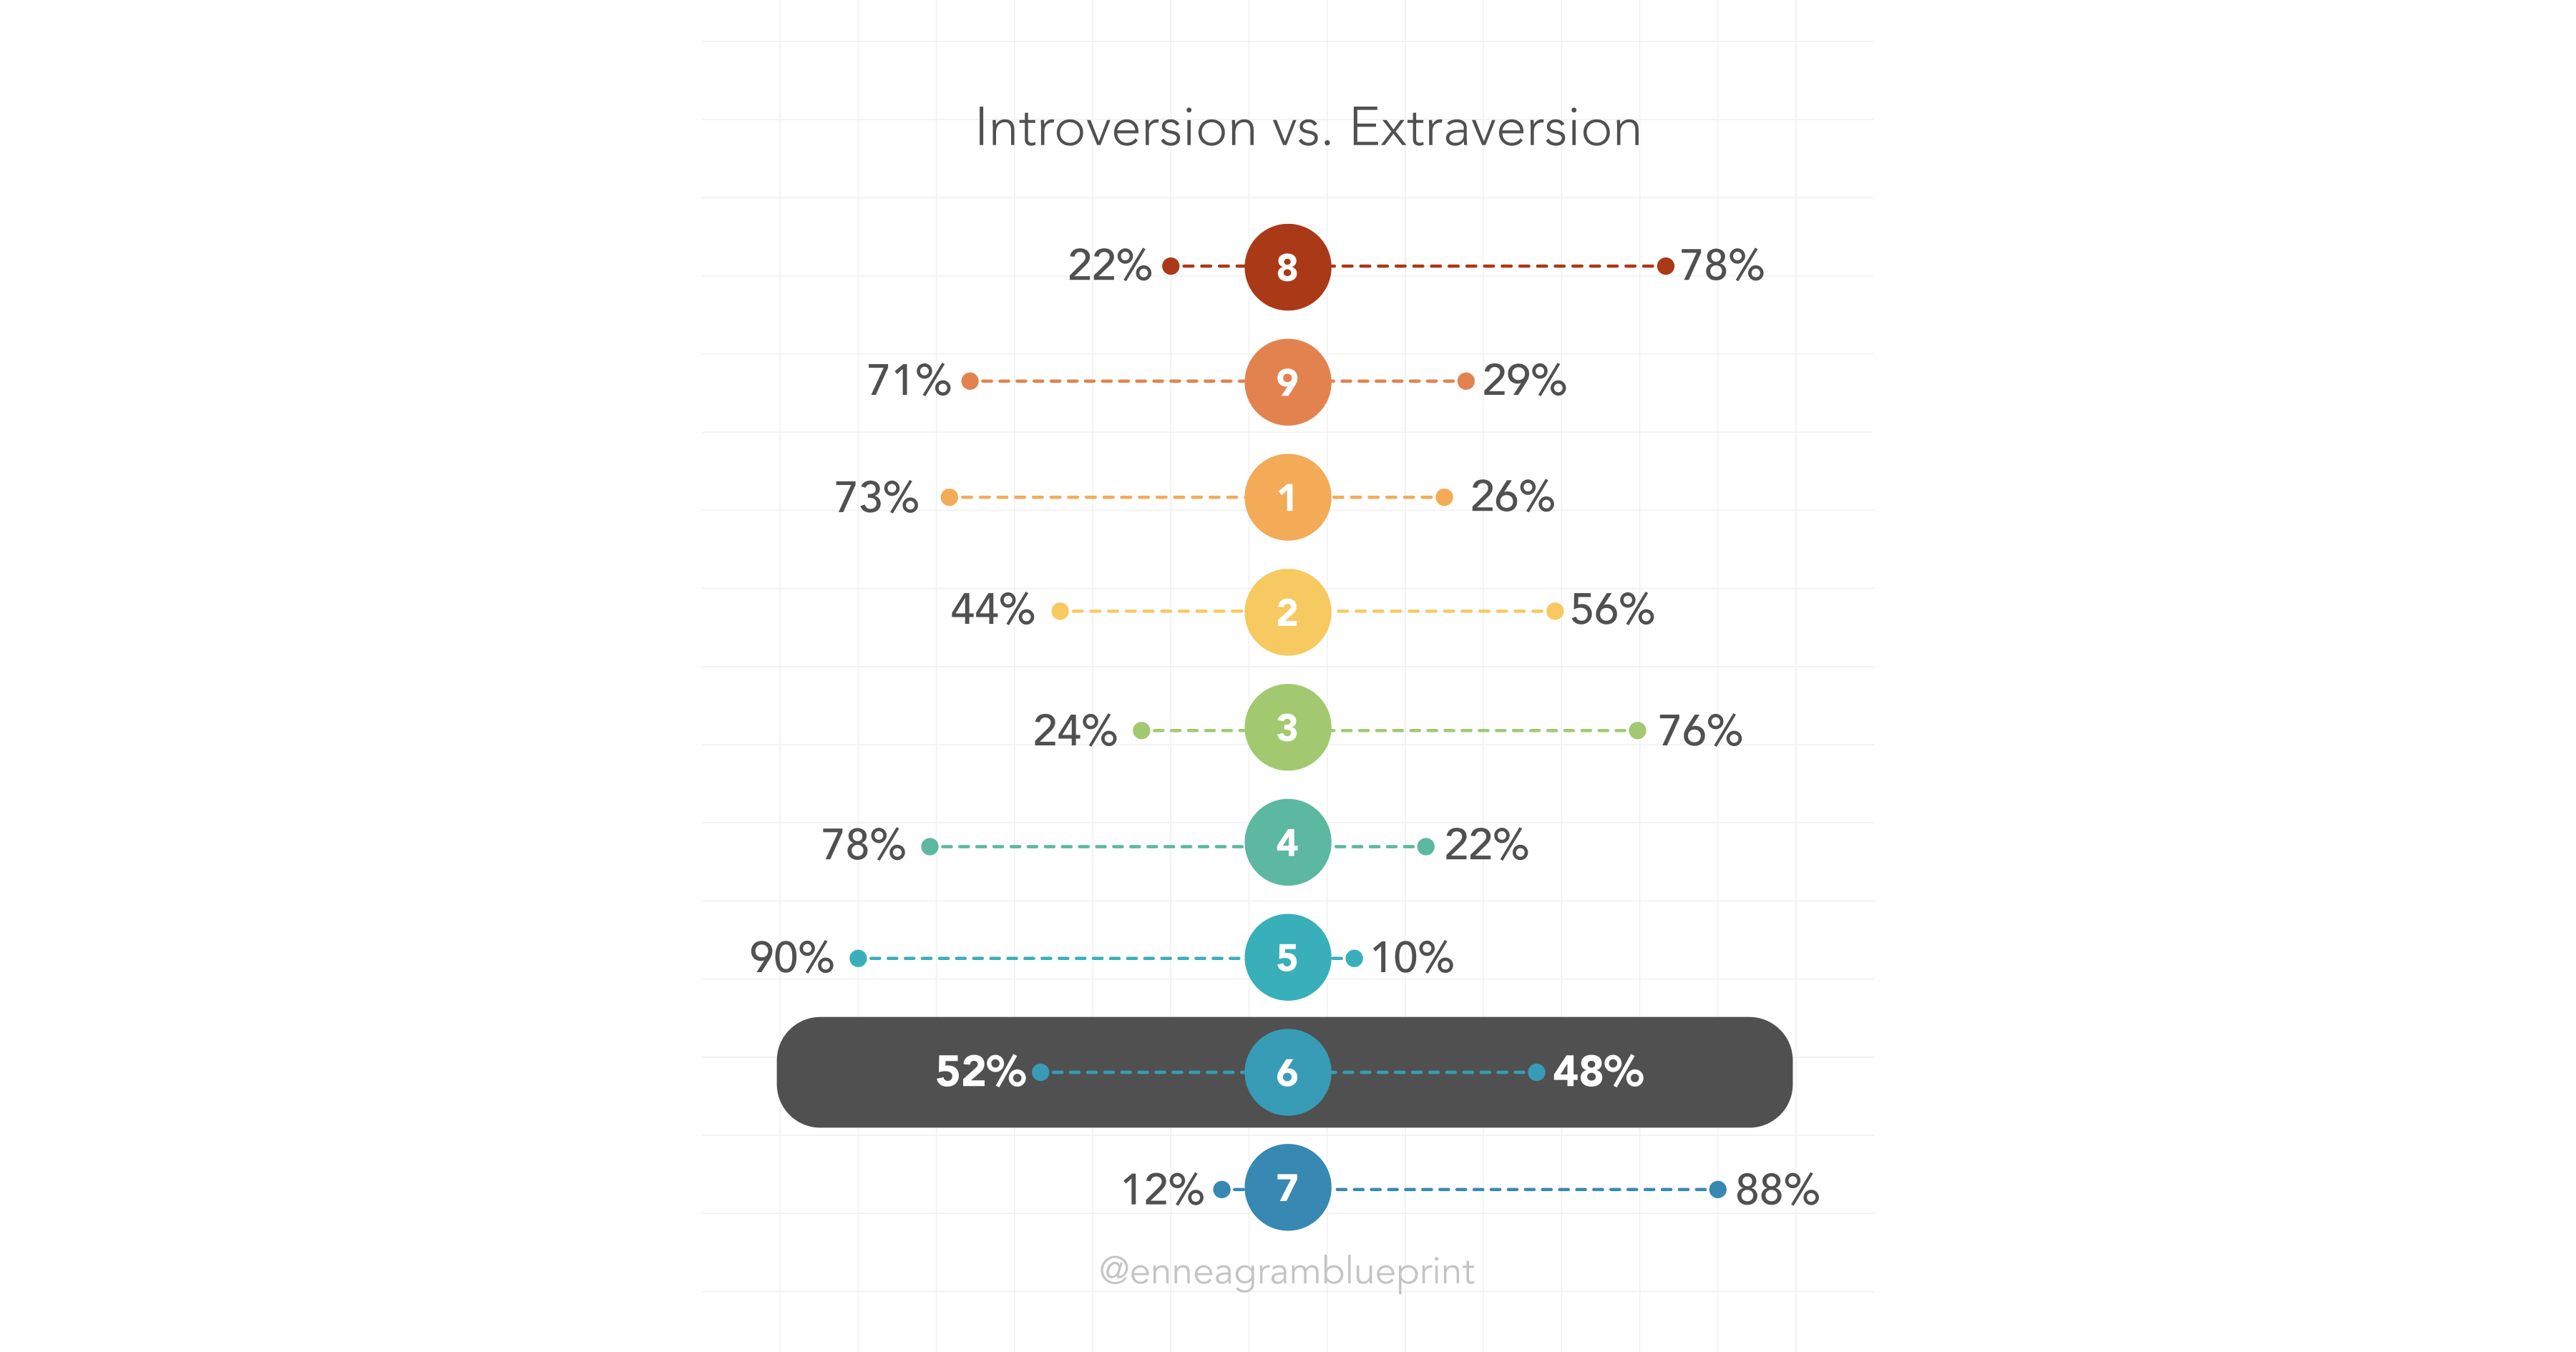 Chart comparing introversion/extraversion ratios for different Enneagram types. Type 8: 22% introverts, 78% extraverts. Type 9: 71% introverts, 29% extraverts. Type 1: 73% introverts, 26% extraverts. Type 2: 44% introverts, 56% extraverts. Type 3: 24% introverts, 76% extraverts. Type 4: 78% introverts, 22% extraverts. Type 5: 90% introverts, 10% extraverts. Type 6: 52% introverts, 48% extraverts. Type 7: 12% introverts, 88% extraverts.